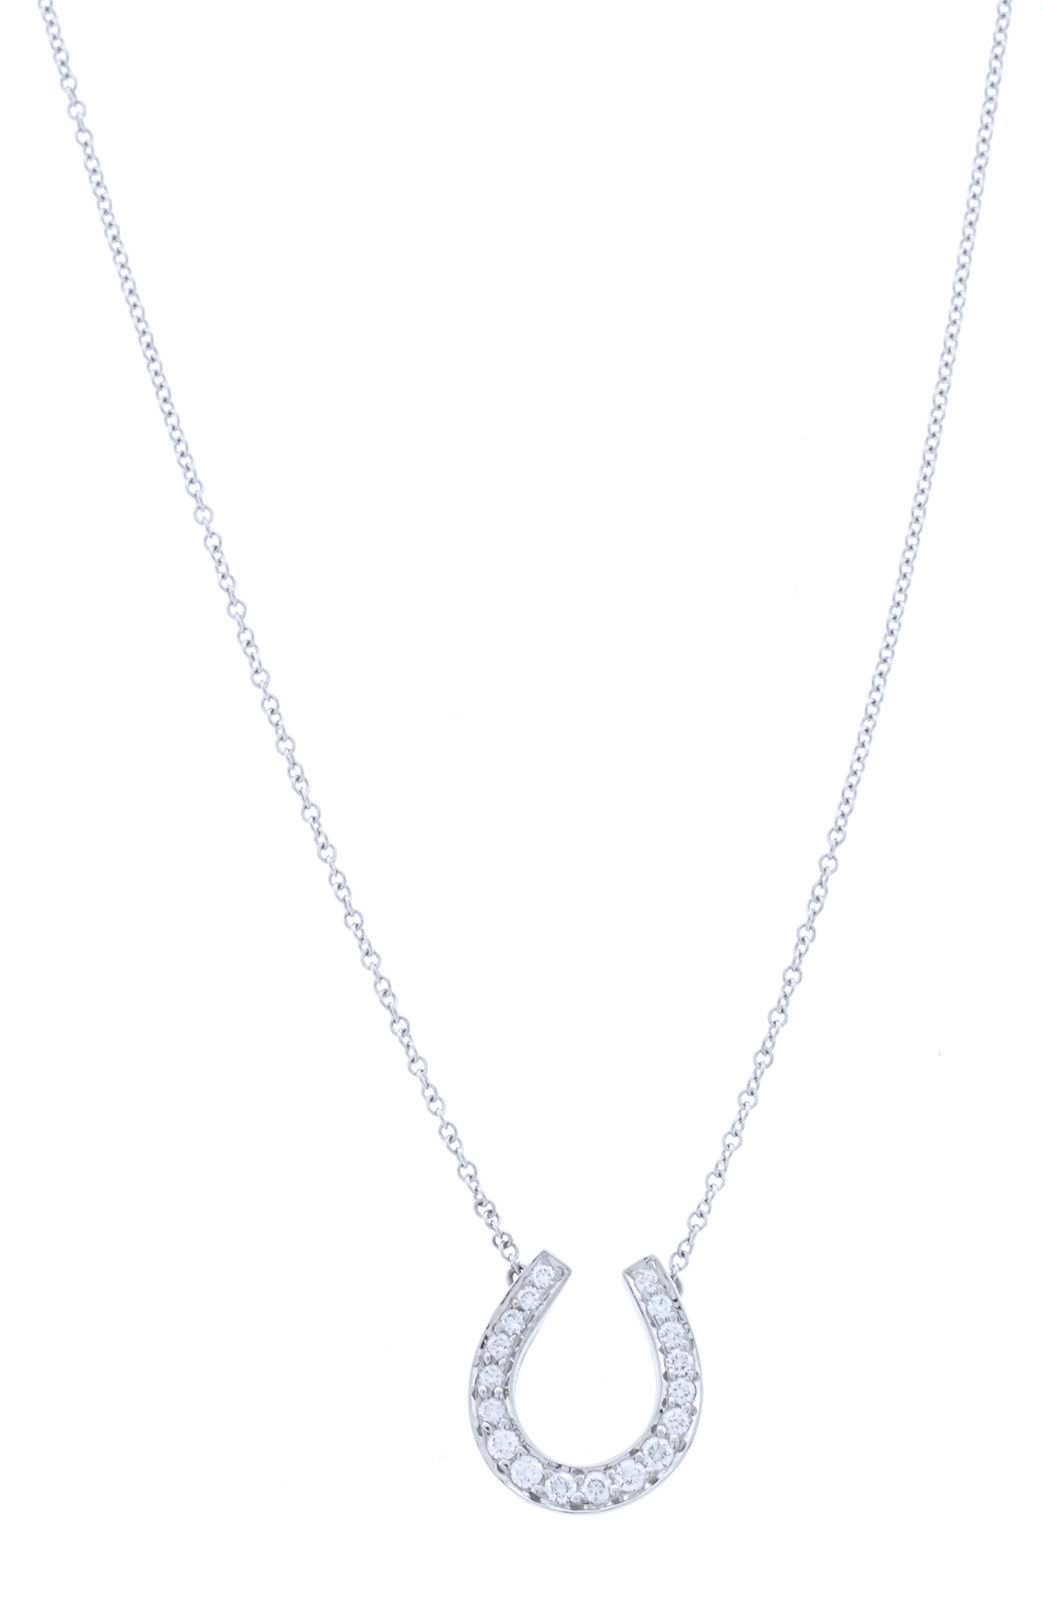 Tiffany & Co. Horseshoe Pendant Necklace - More Than You Can Imagine